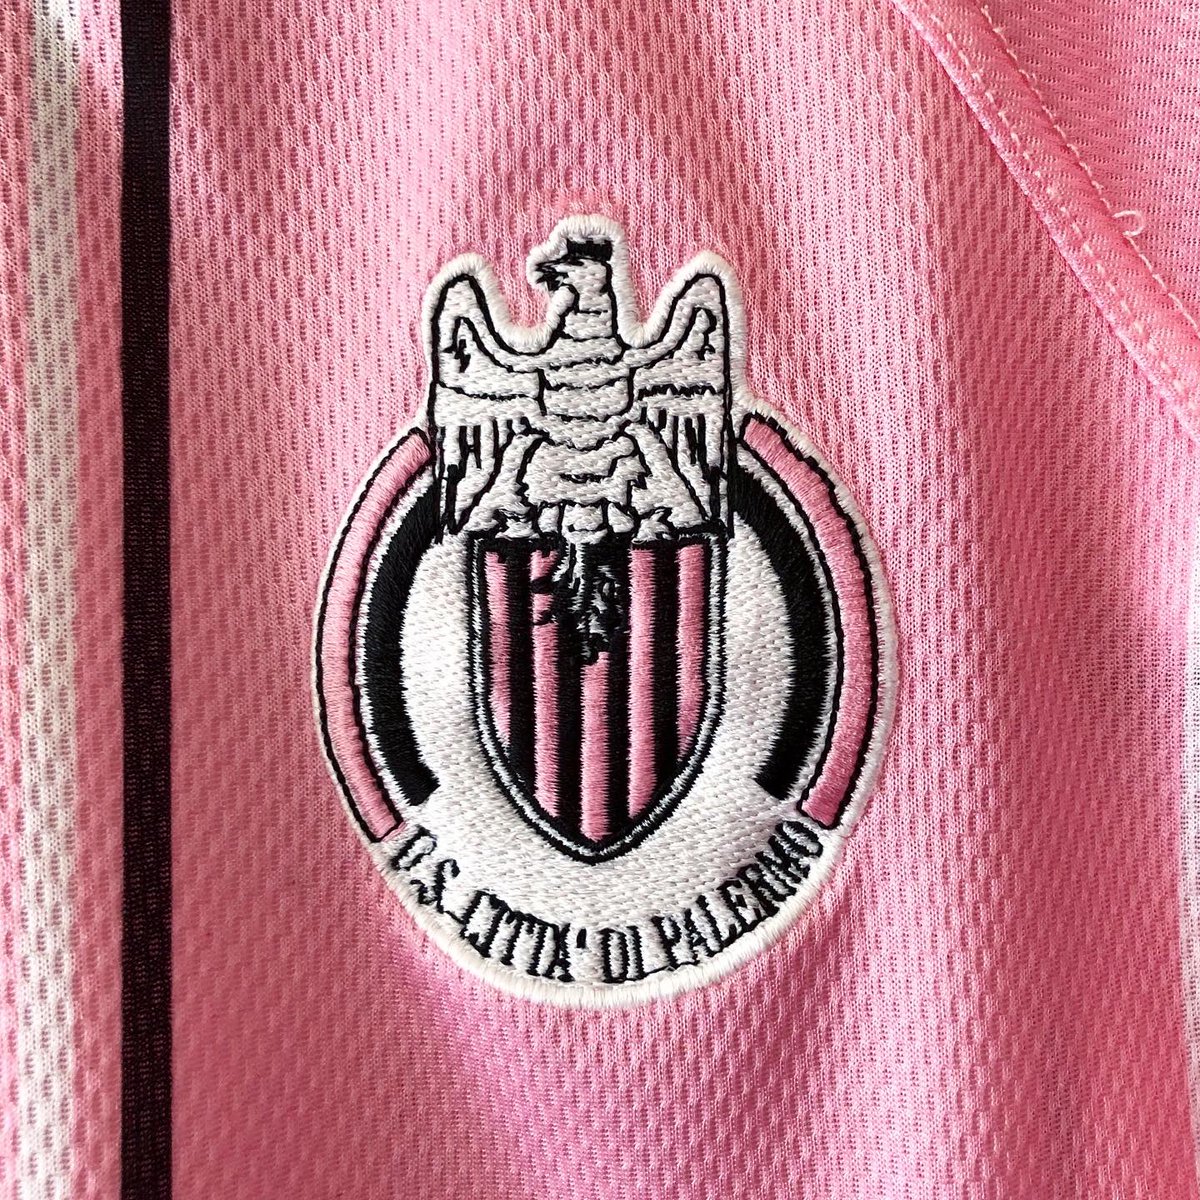 . @palermocalcioitHome Kit, 1996/97 @Kappa_UKFor the 50th post in this thread, I picked a very special one, from the 2nd year of the “Palermo dei Picciotti”, when local coach Arcoleo managed several Palermo-born-and-bred players such as Vasari, Galeoto, and Tedesco #HomeShirts